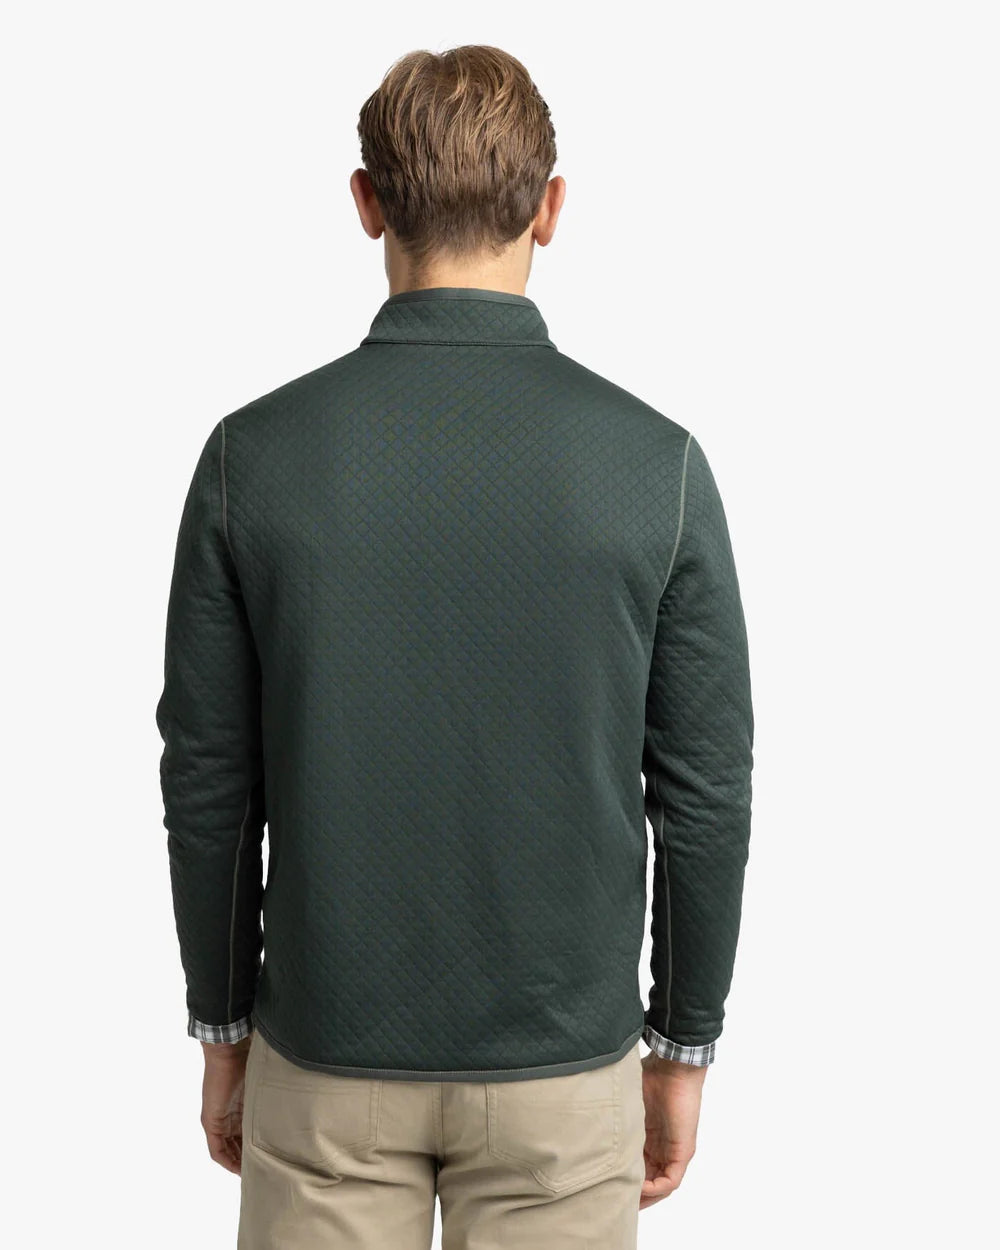 Wearing tidewater teal groove pant (6) still deciding on keeping the 1/2  zip in grey sage. Debating on returning so I can attempt to get a half zip  in heathered desert sun